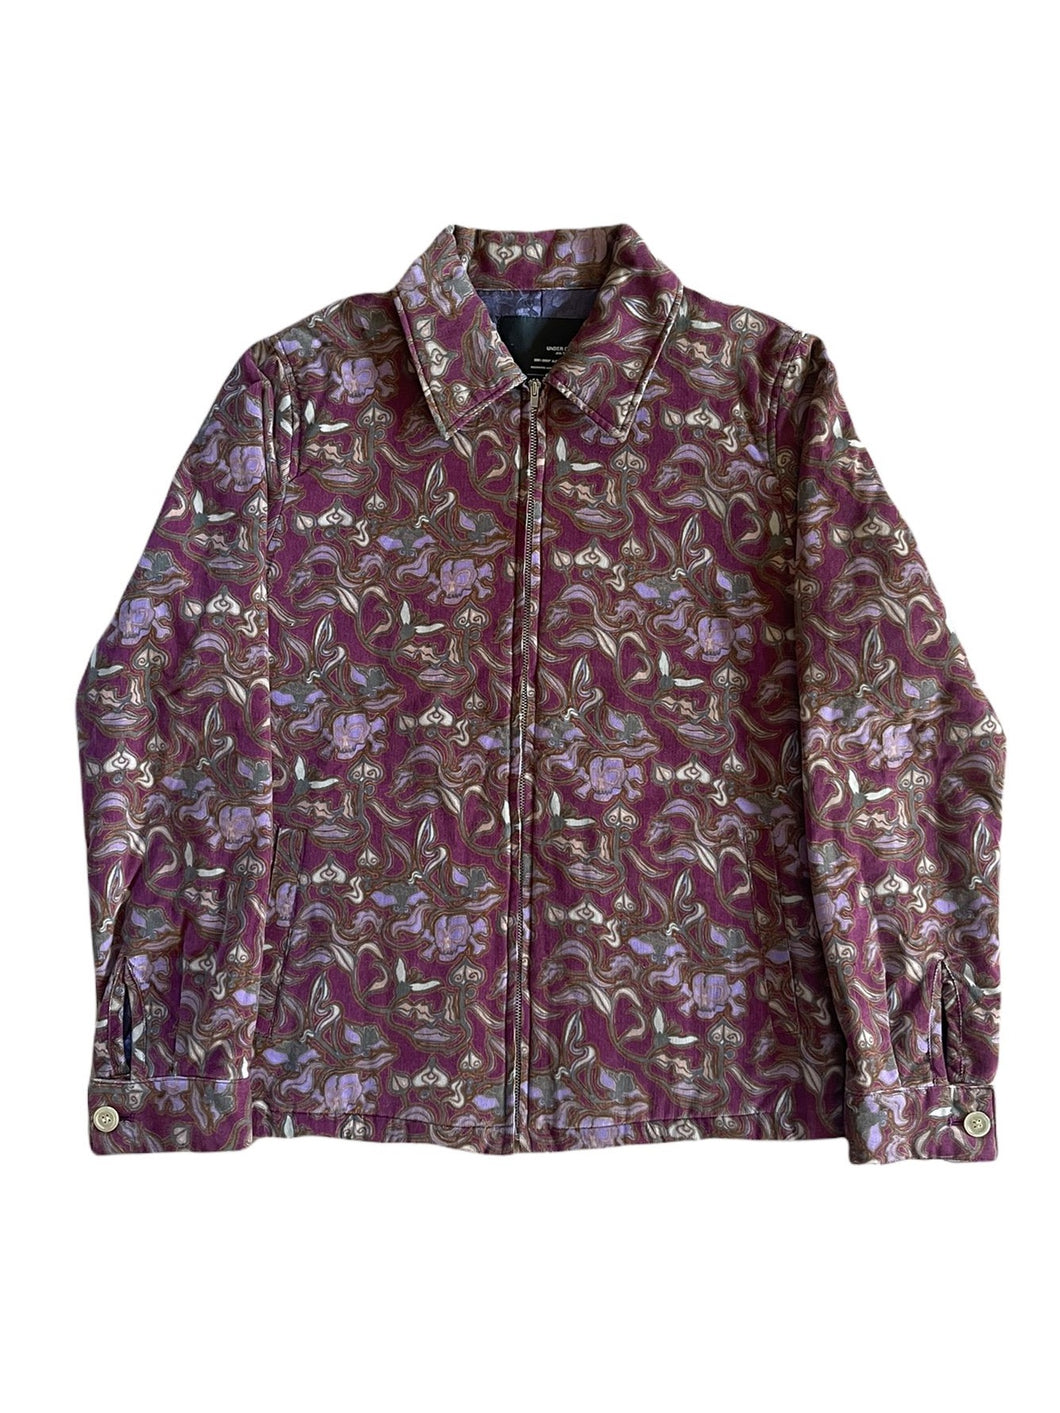 Undercover DECORATED ARMED VOLUNTARY FORCES Floral Jacket